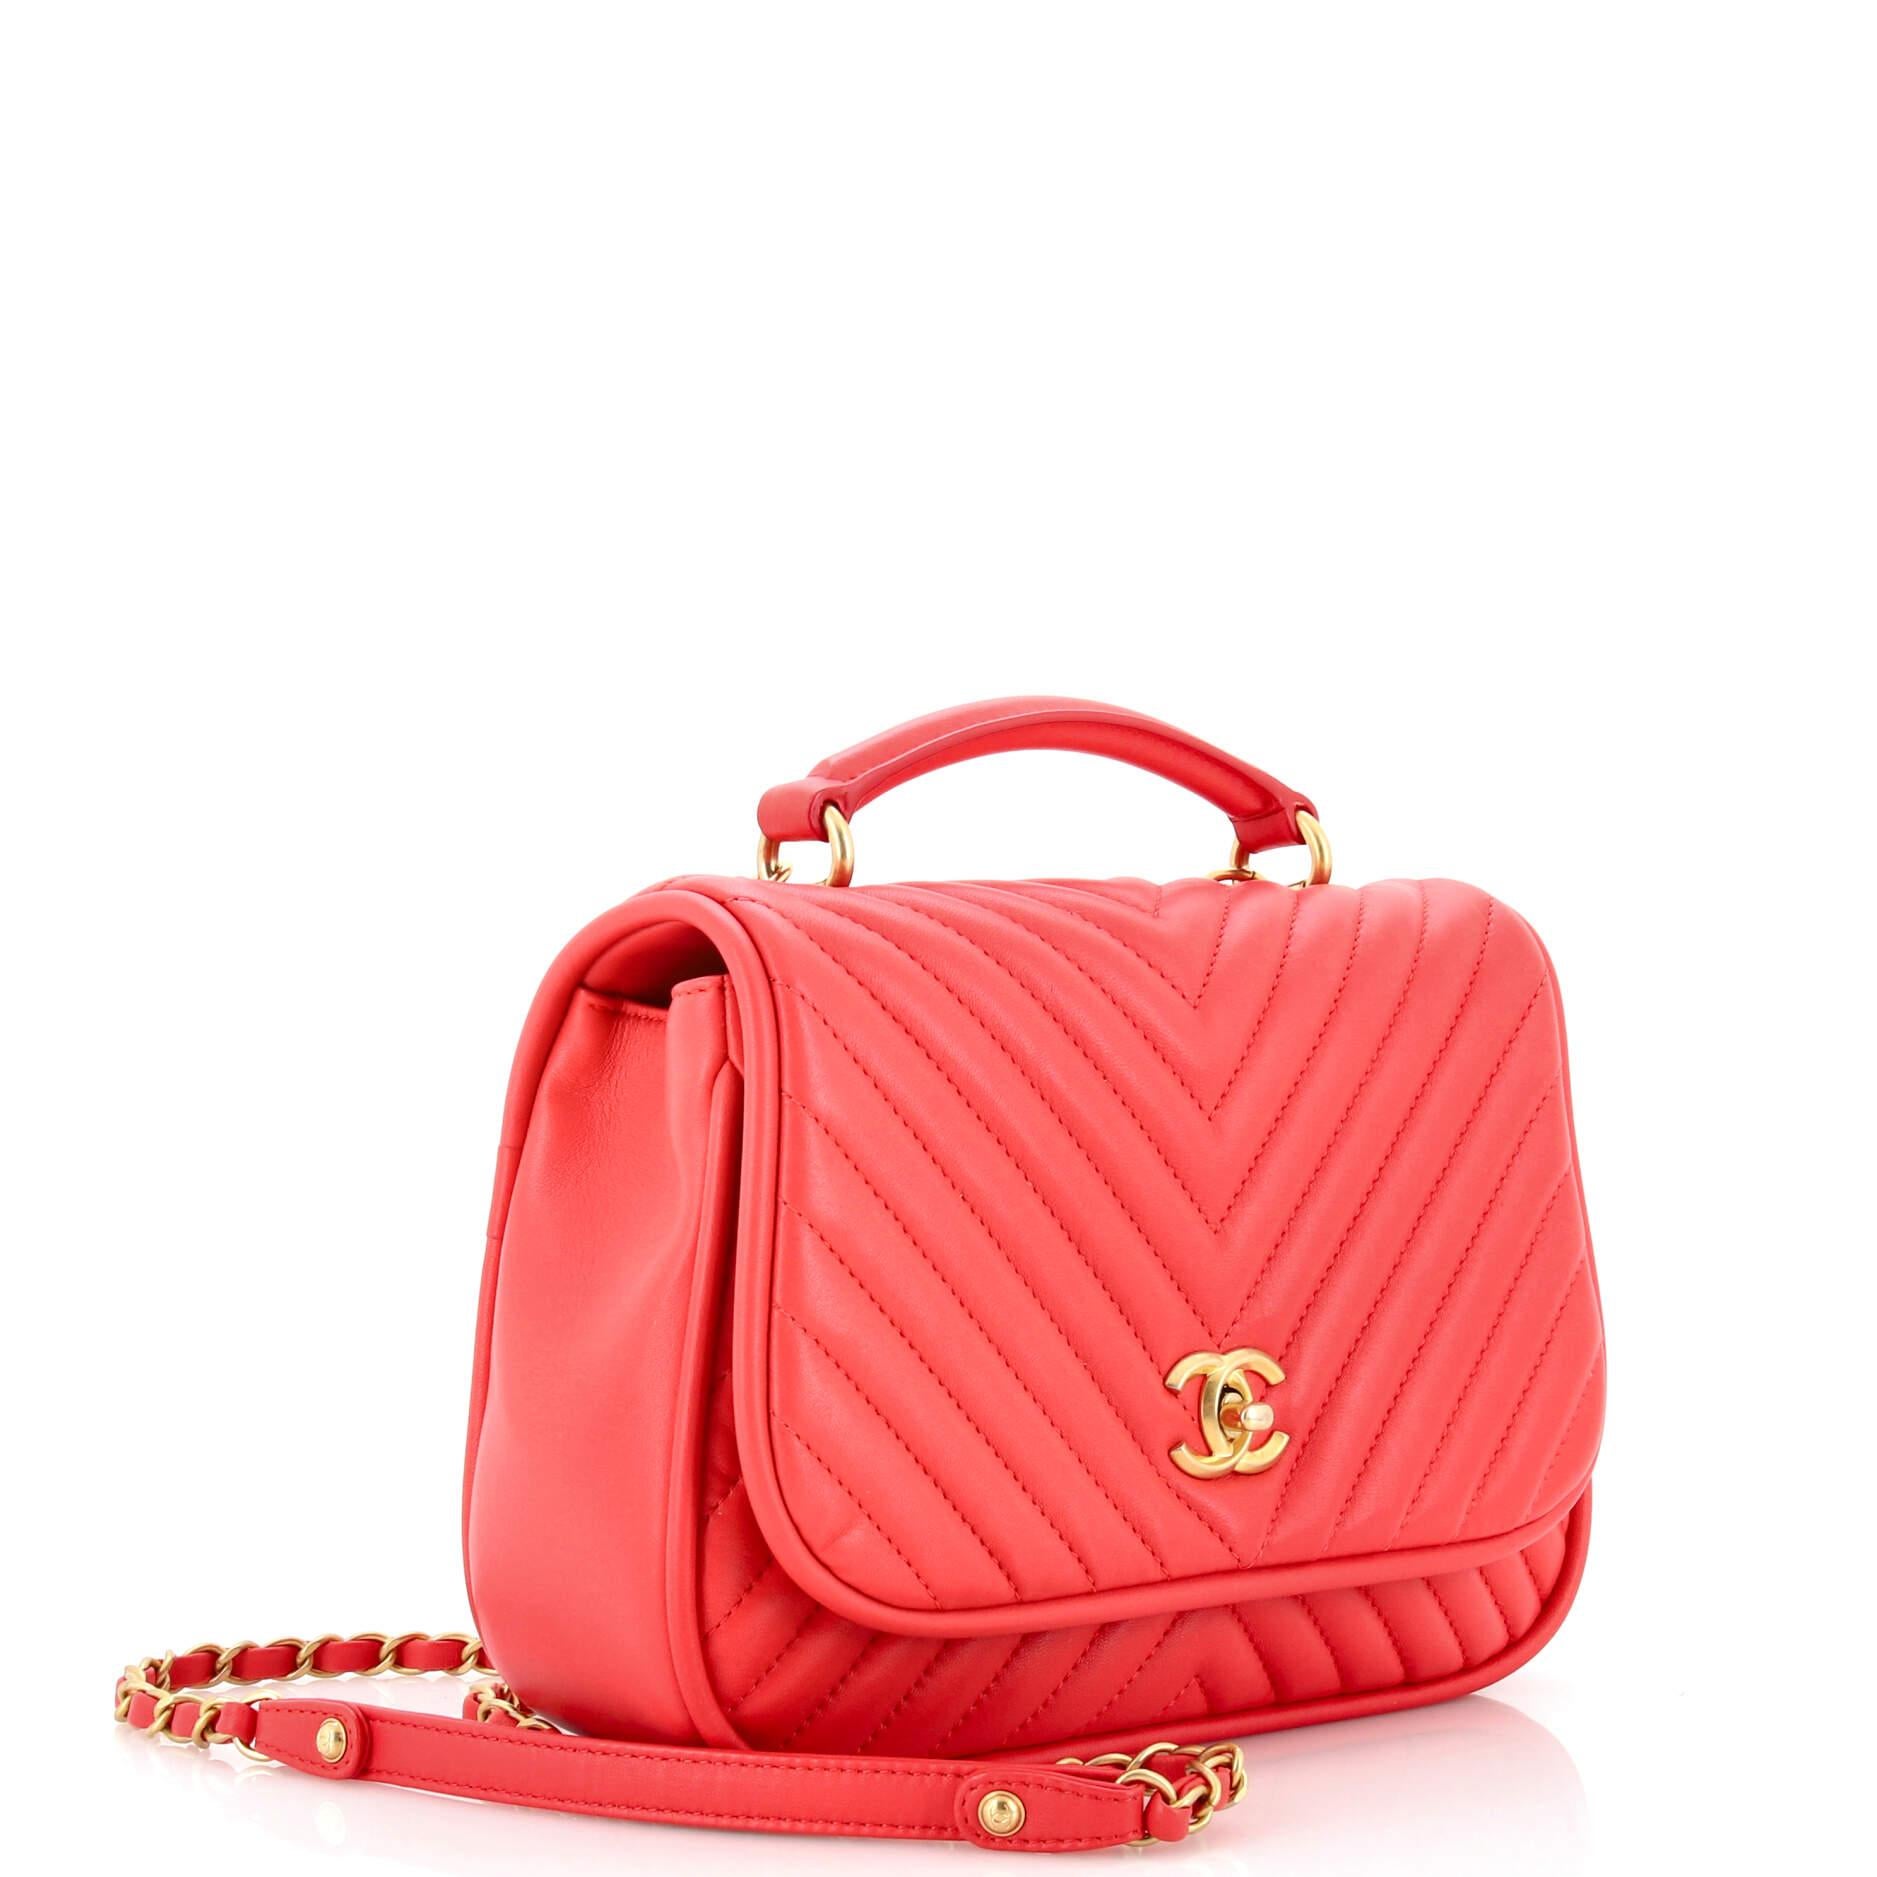 Chanel Reversed Round Flap Bag Chevron Lambskin Medium In Good Condition For Sale In NY, NY